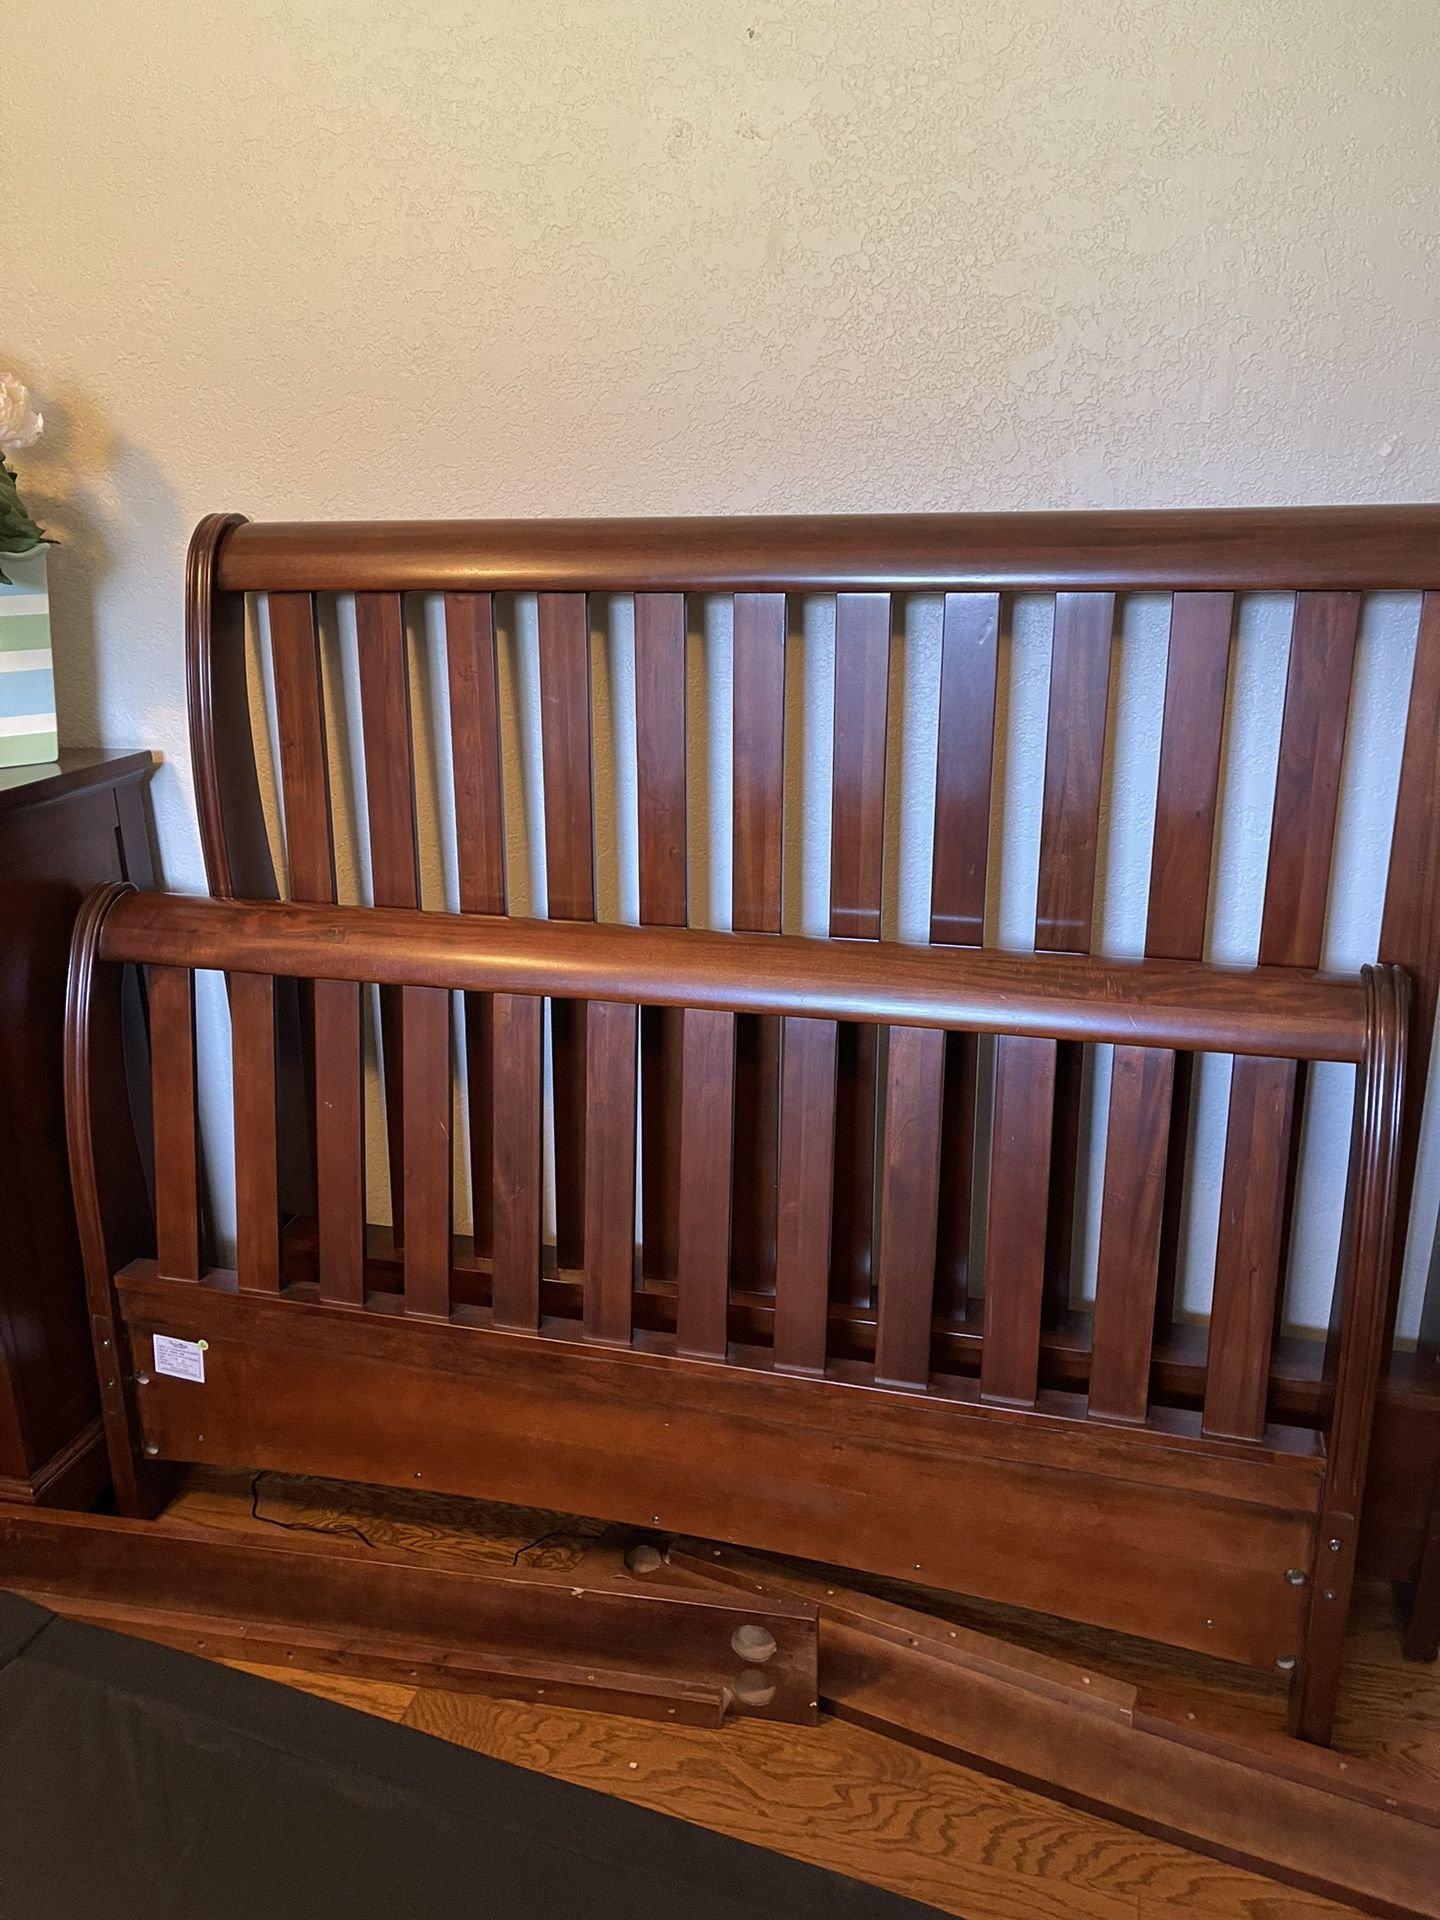 Queen Sleigh Bed from haverty’s